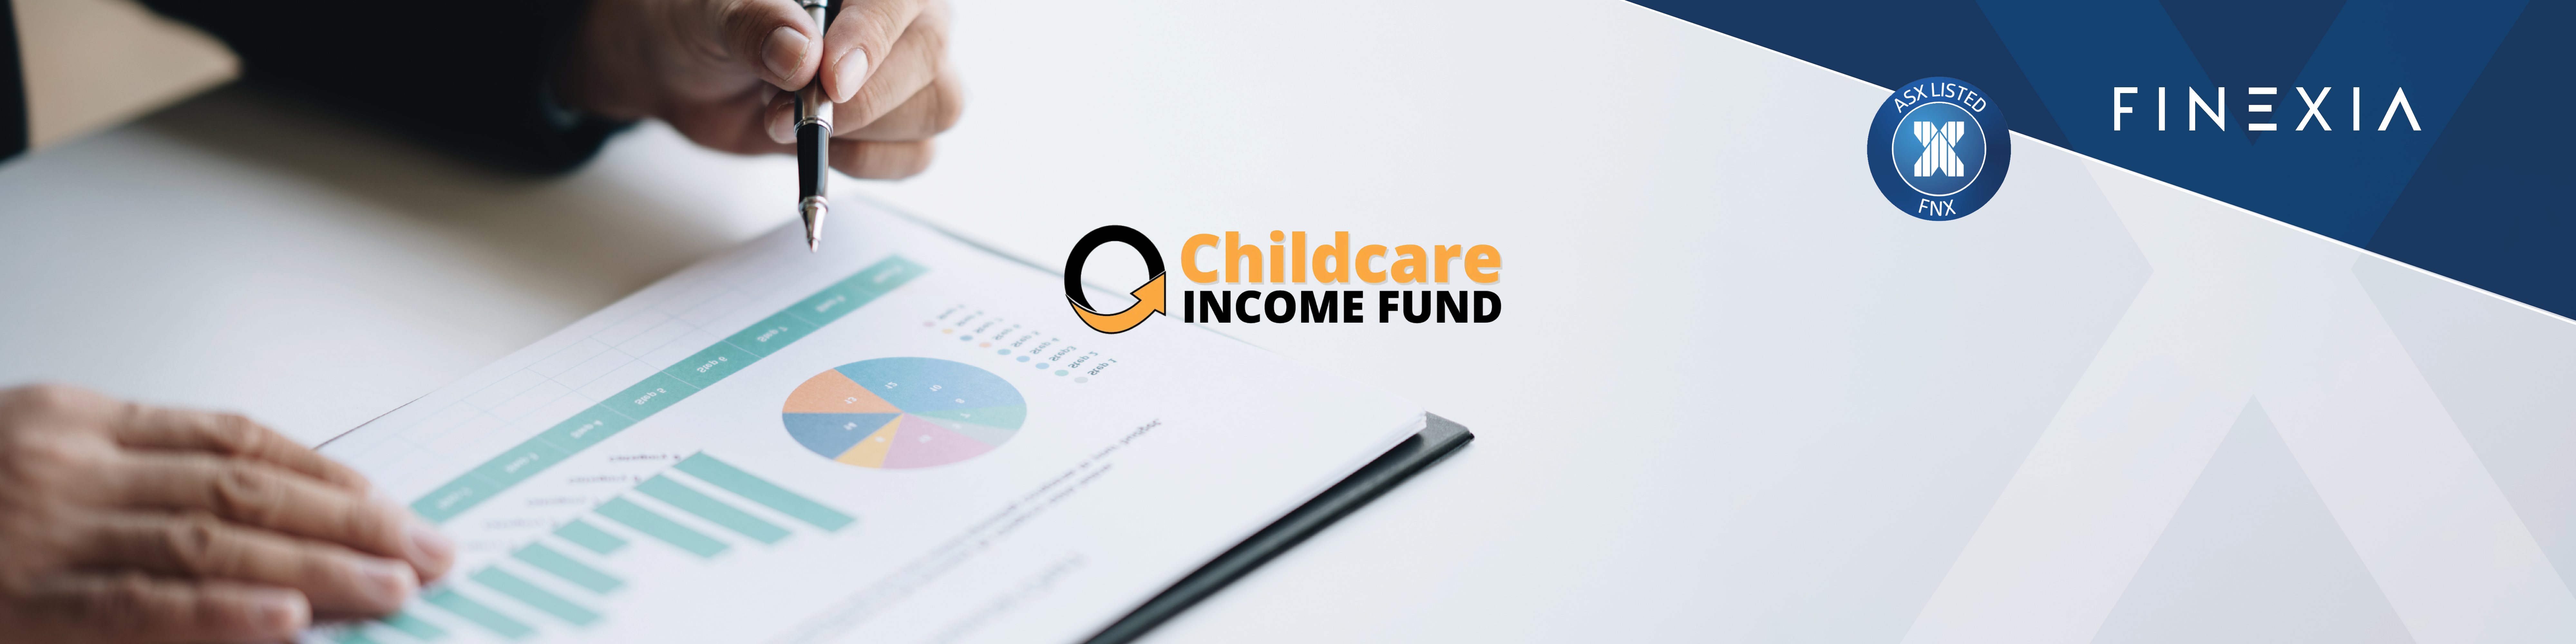 Government allocates $55.31bn to childcare affordability and family support